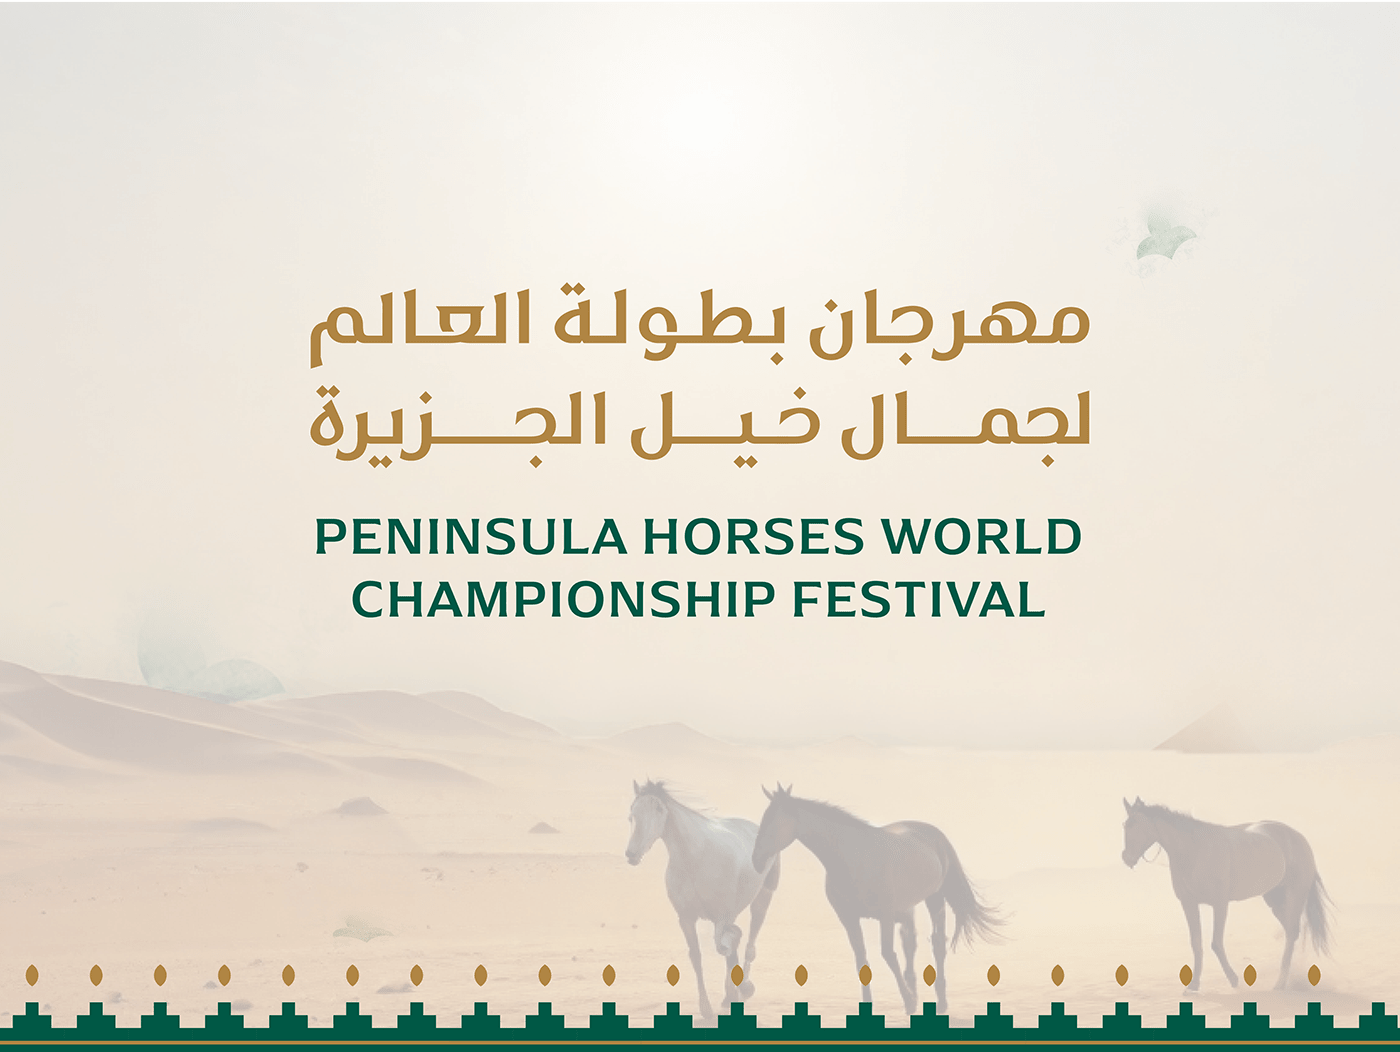 hourse Horse Competition حصان عربي arabic posters  Poster Design سوشيال ميديا posters design banner arabian horse Horse Festival